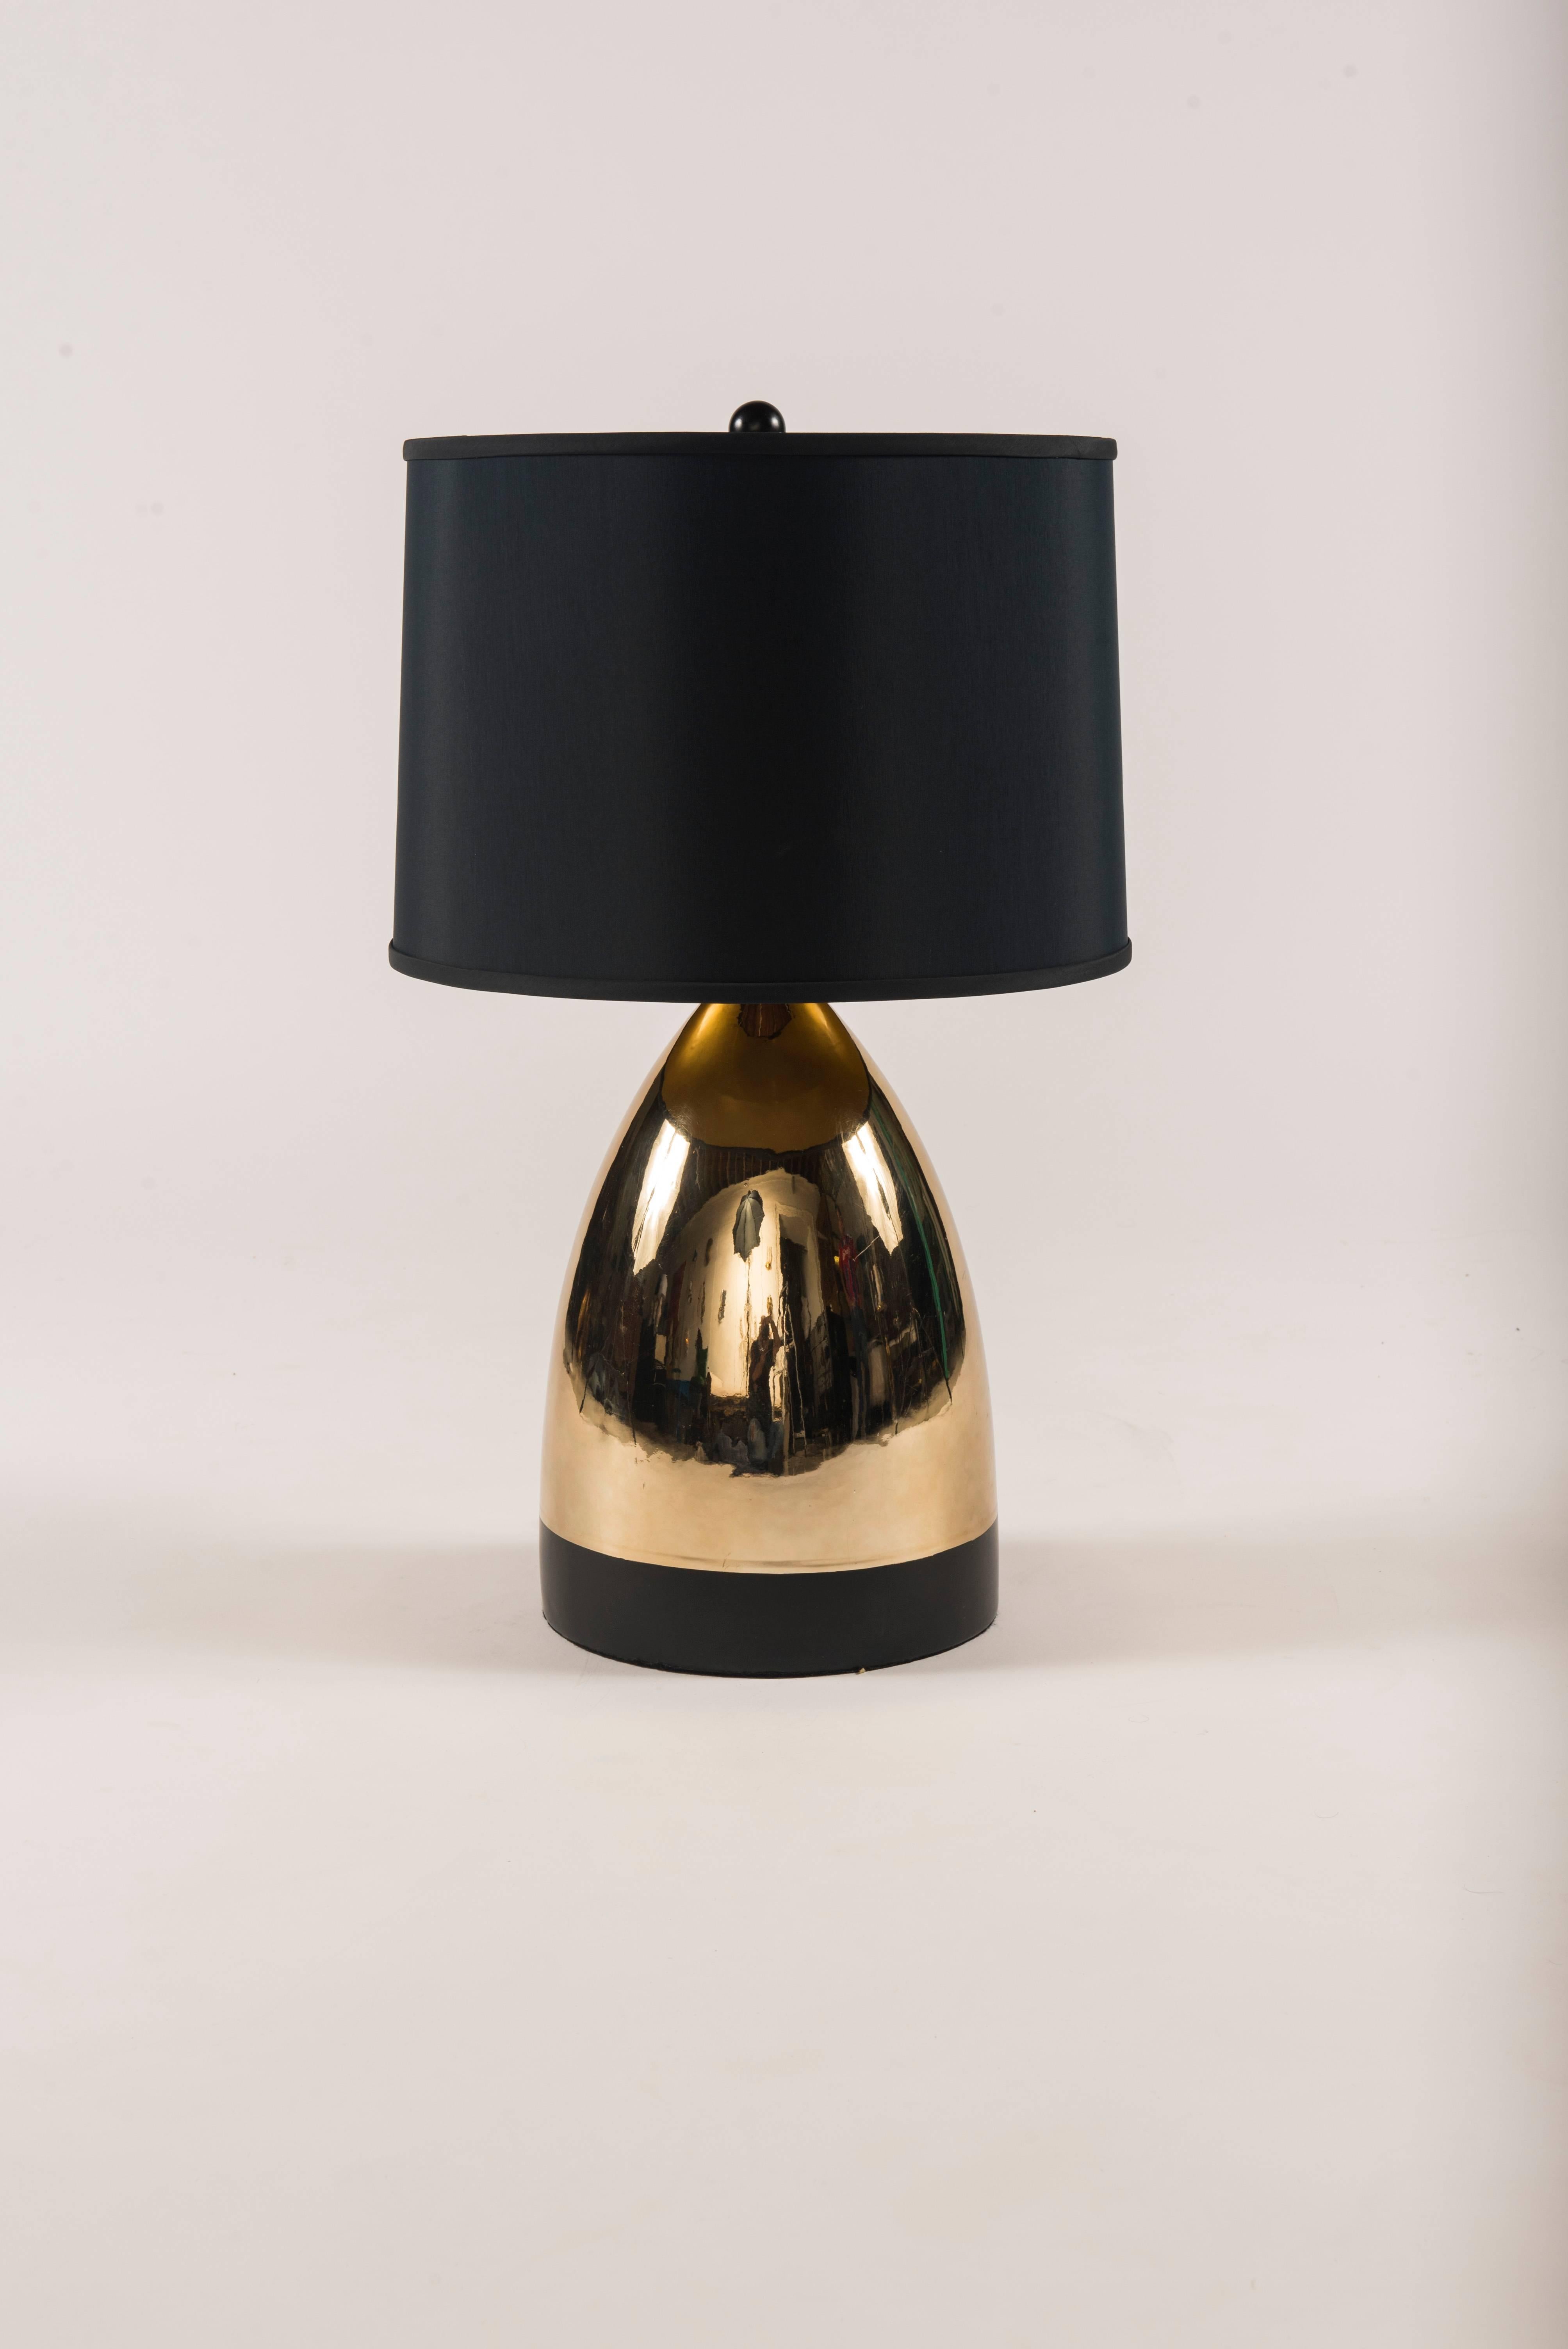 A 1970s pair of fire glazed gilt ceramic lamps with black enamel banding and black shades, newly electrified.